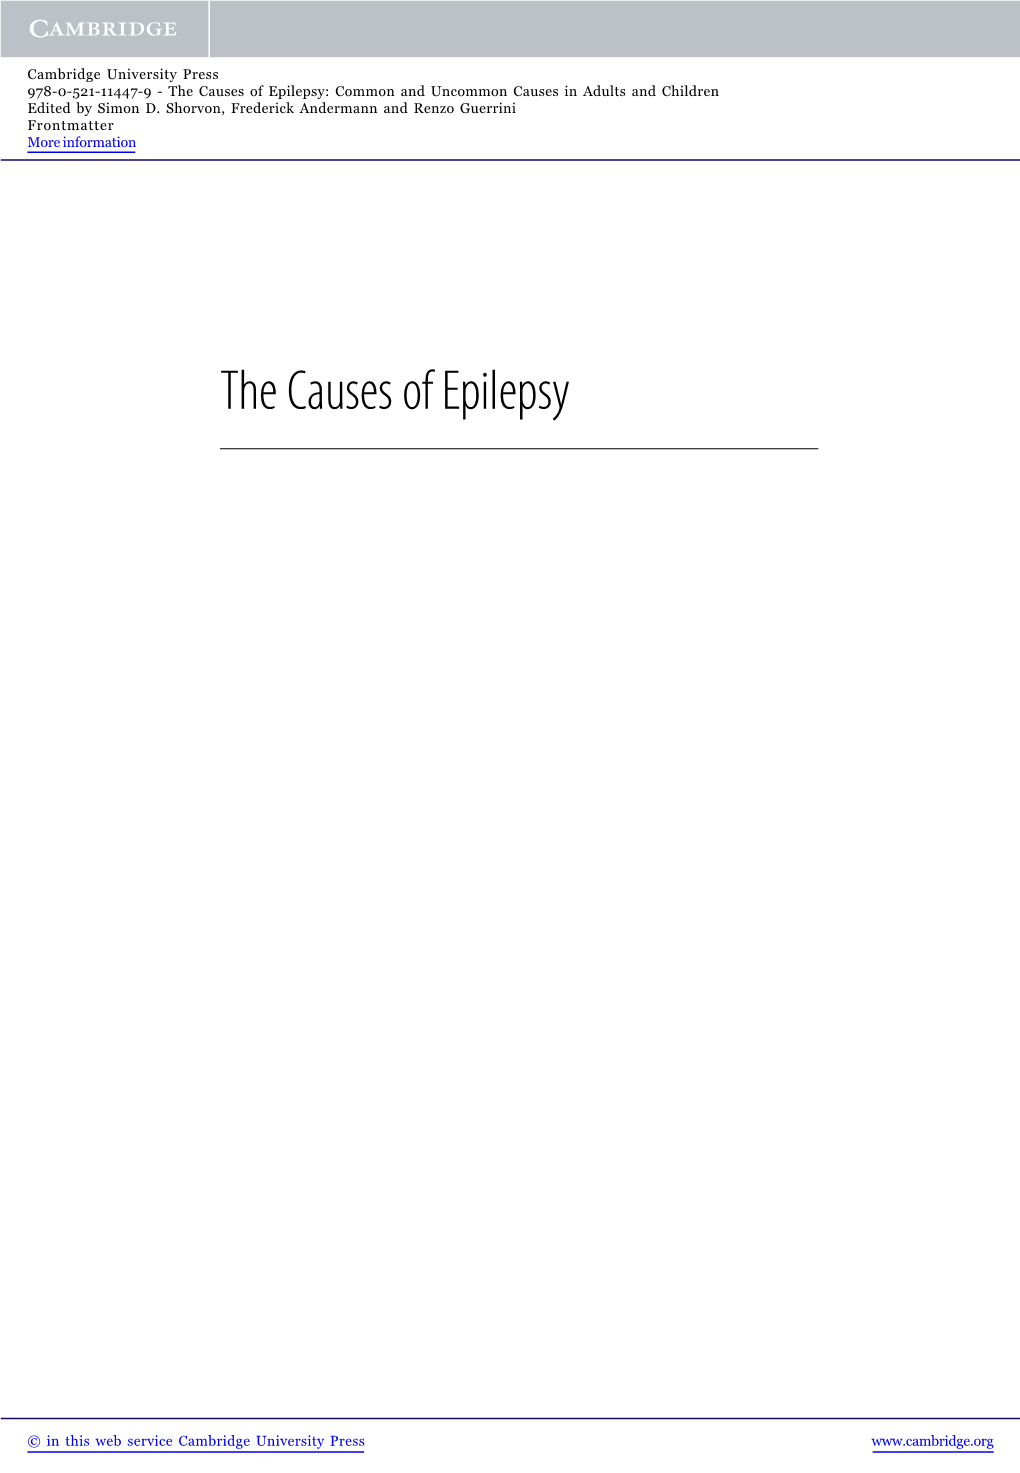 The Causes of Epilepsy: Common and Uncommon Causes in Adults and Children Edited by Simon D